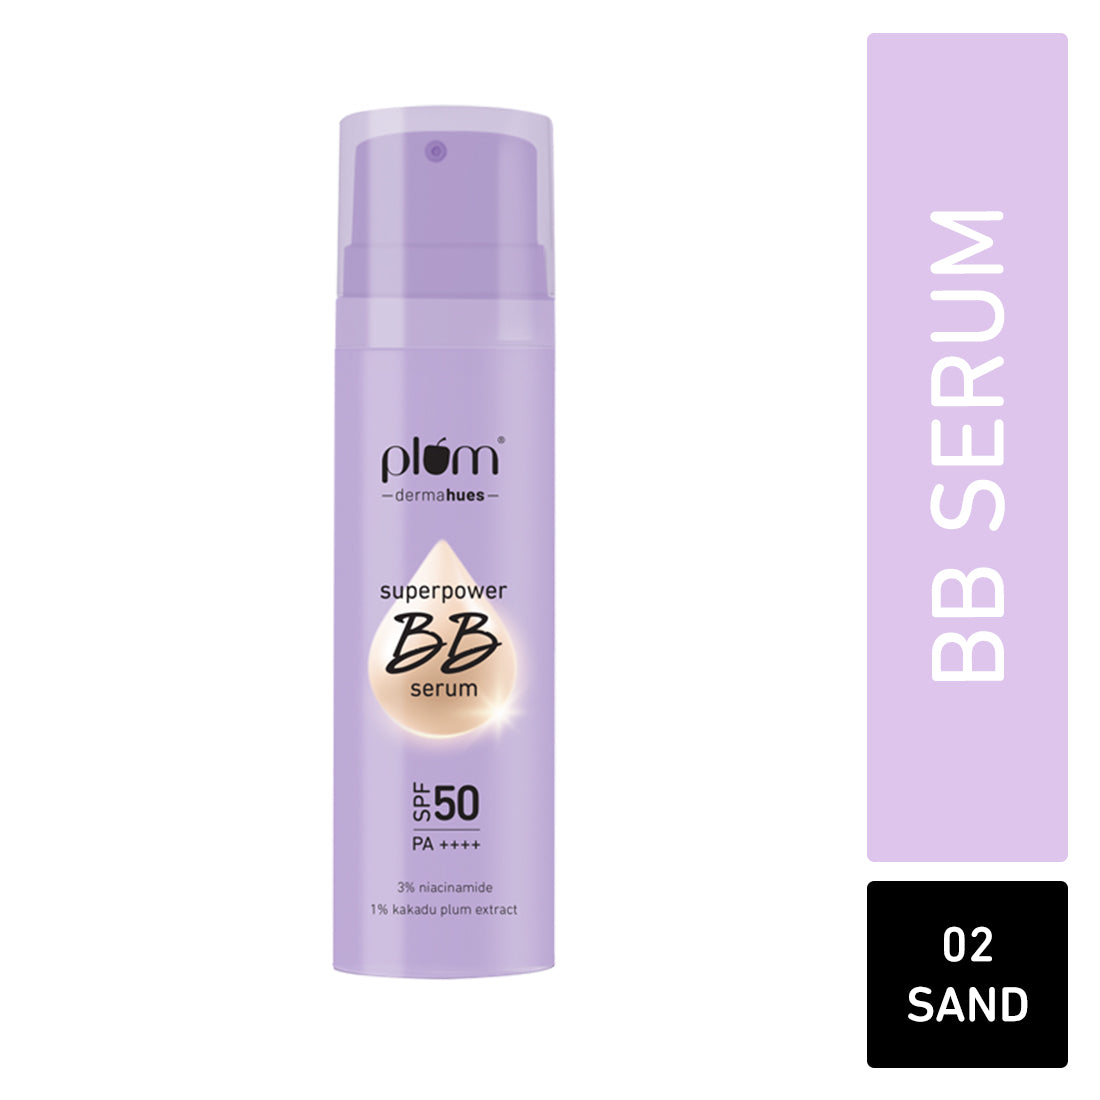 

Superpower BB Serum with SPF 50 PA ++++ | Natural Everyday Base | Evens Out Skin Tone | Buildable Coverage | With 3% Niacinamide | 100% Vegan & Cruelty Free, 02 Sand